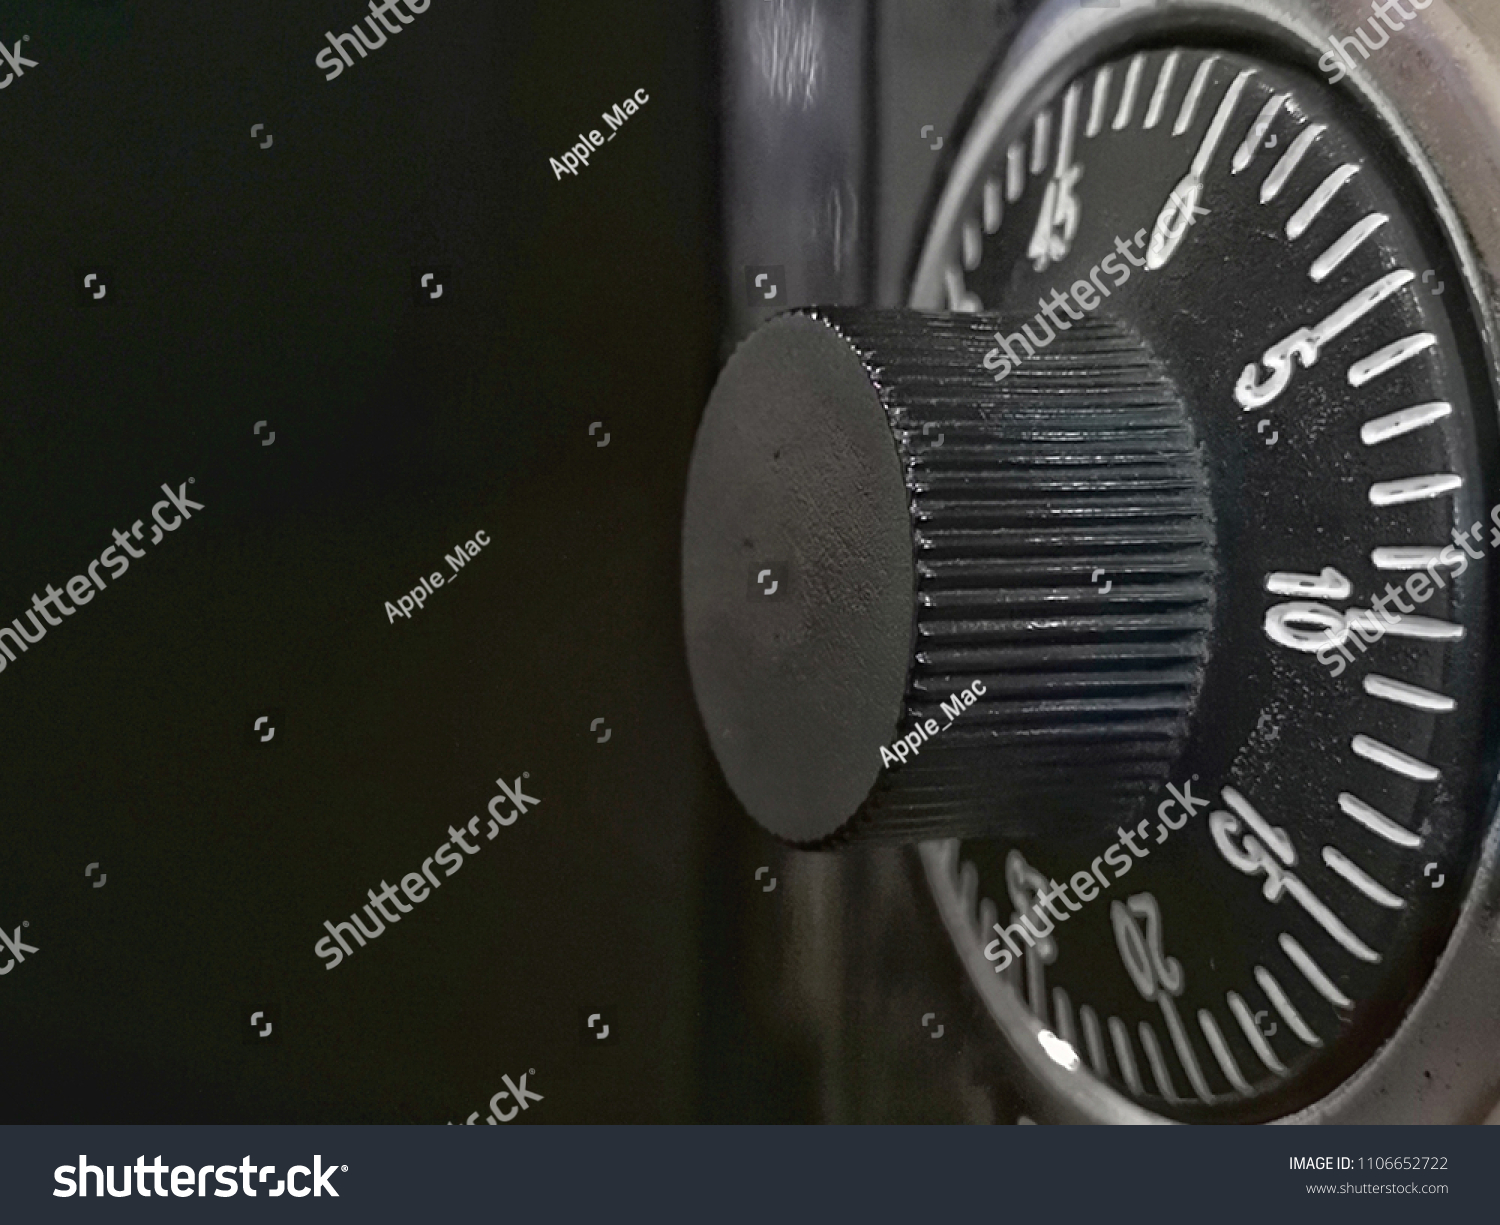 Focus combination dial safe of deposit box on black background. Security concept. Protect your money or jewelry. Copy space. #1106652722